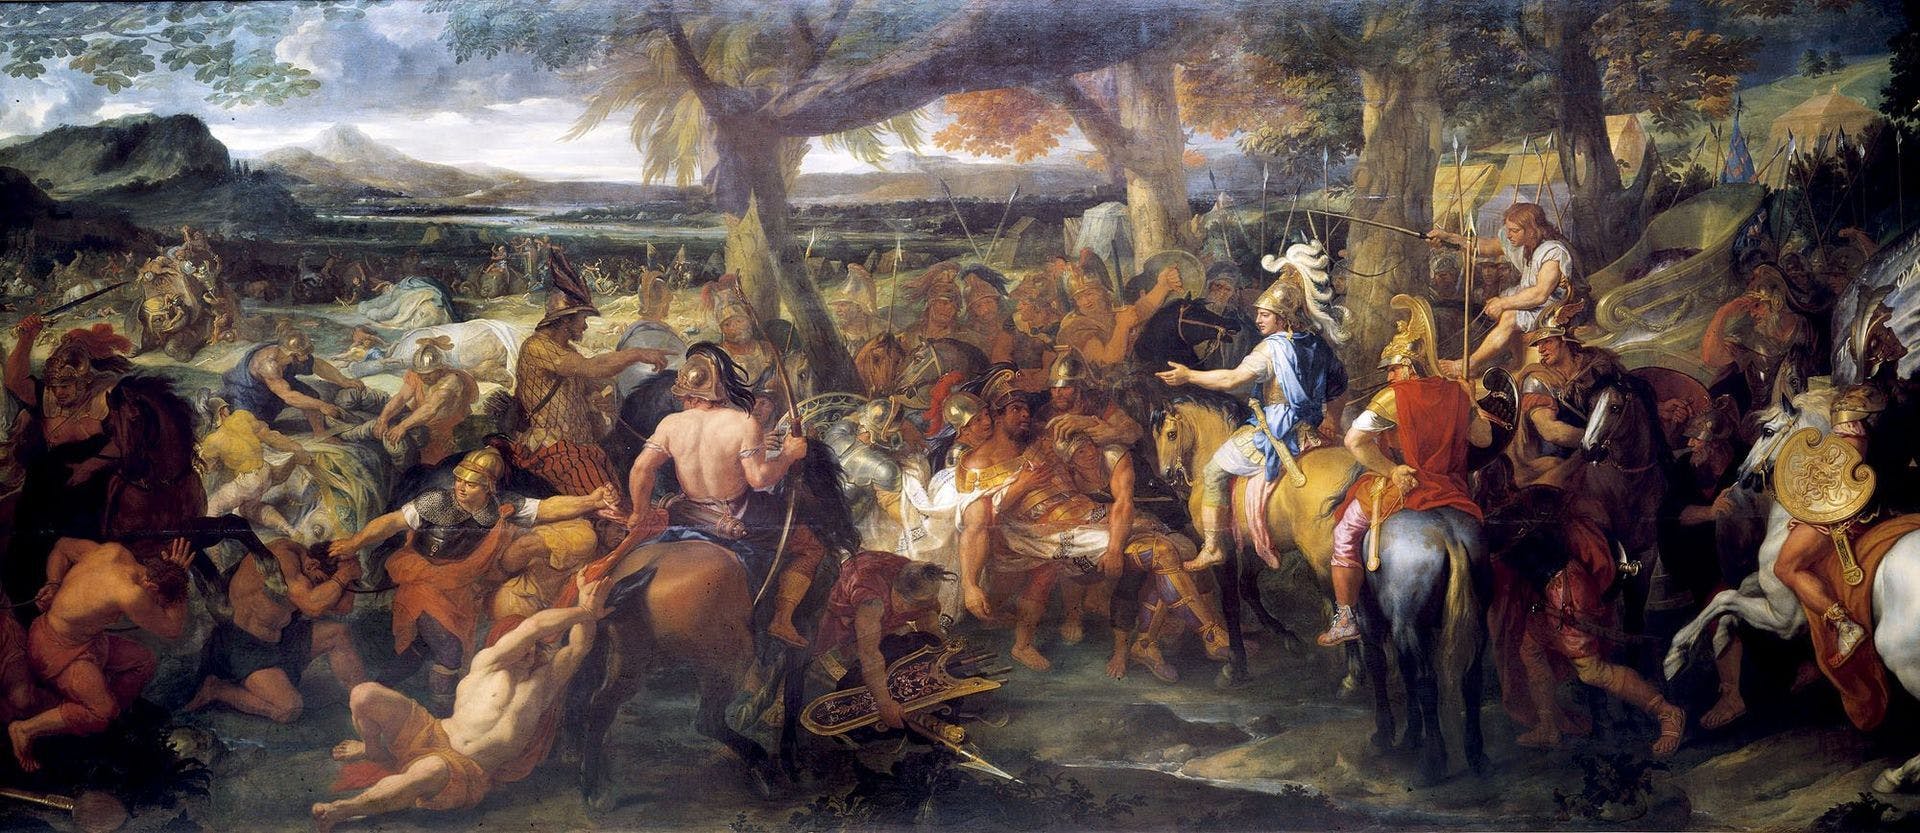 A painting by Charles Le Brun depicting Alexander and Porus (Puru) during the Battle of the Hydaspes